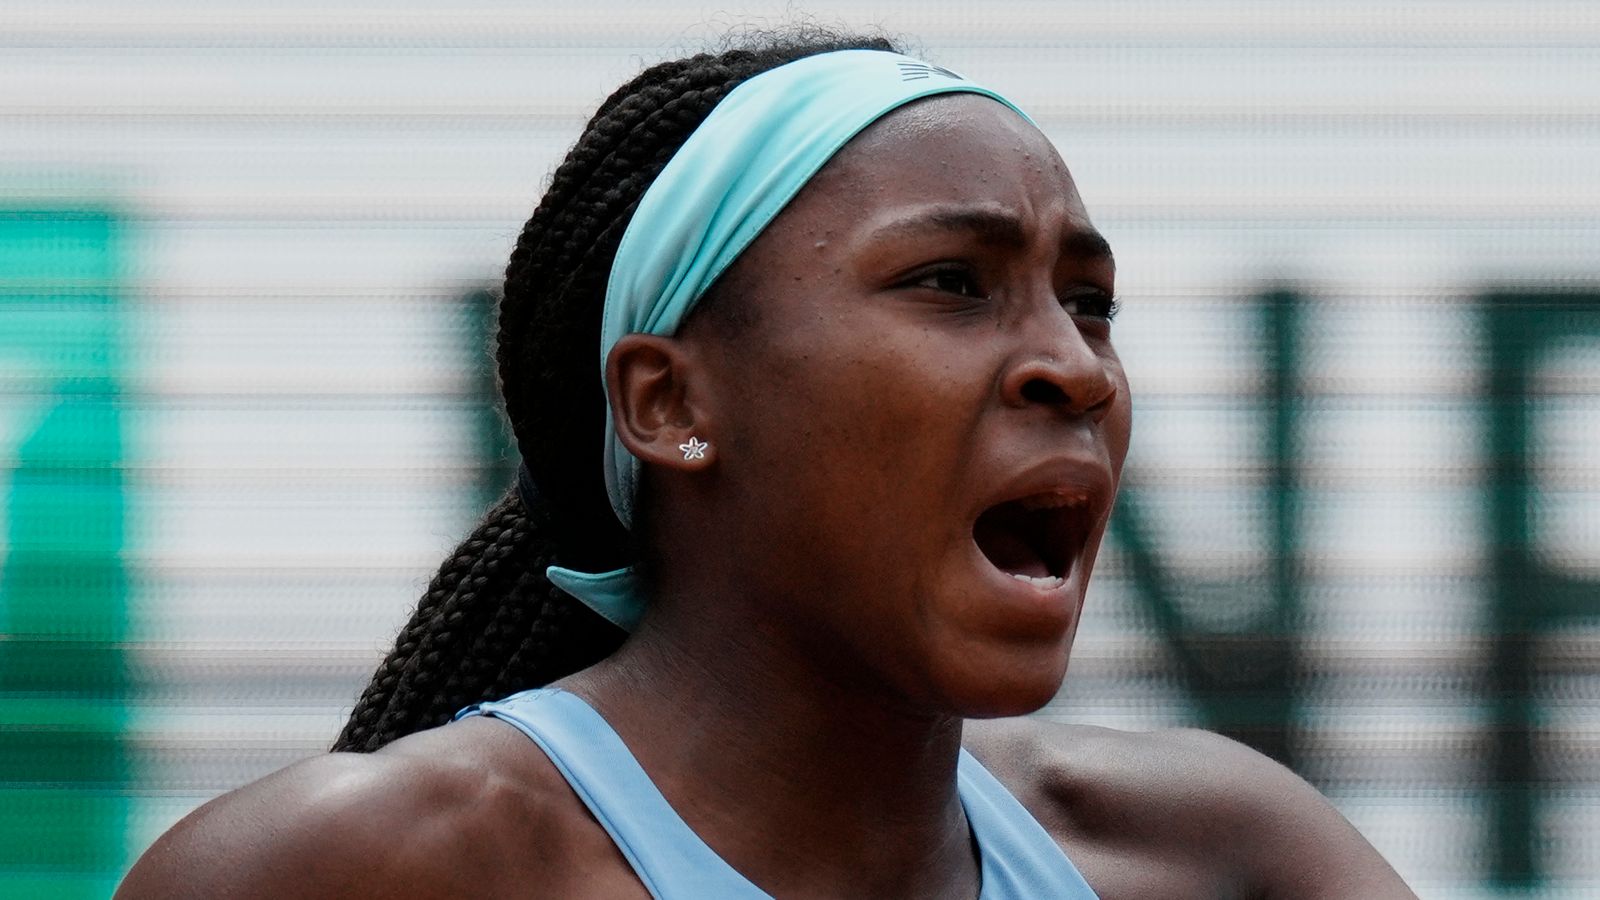 Coco Gauff calls for peace and an end to gun violence after reaching French Open final